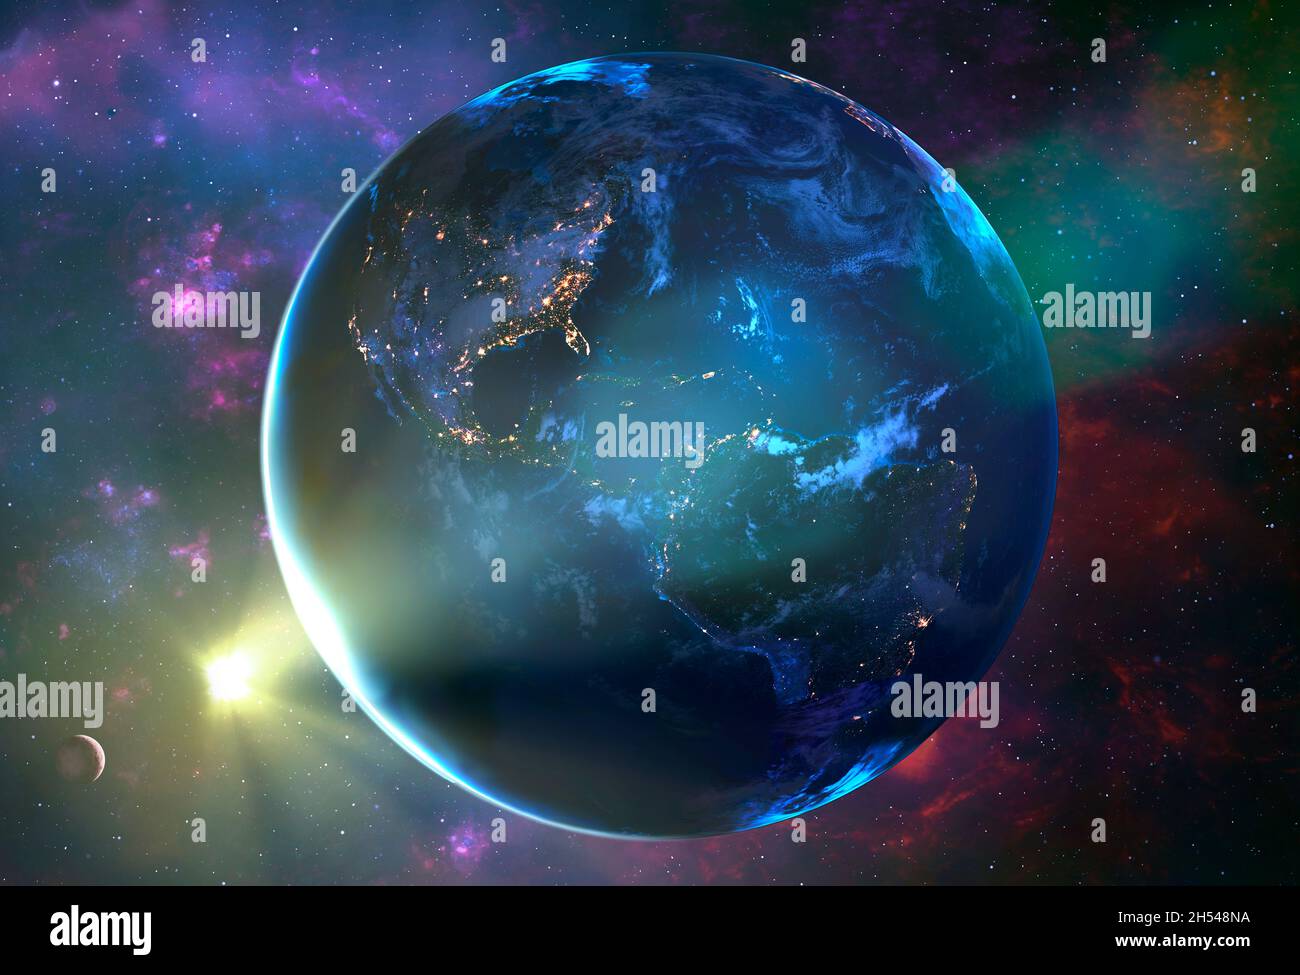 Planet Earth viewed from space, illustration Stock Photo